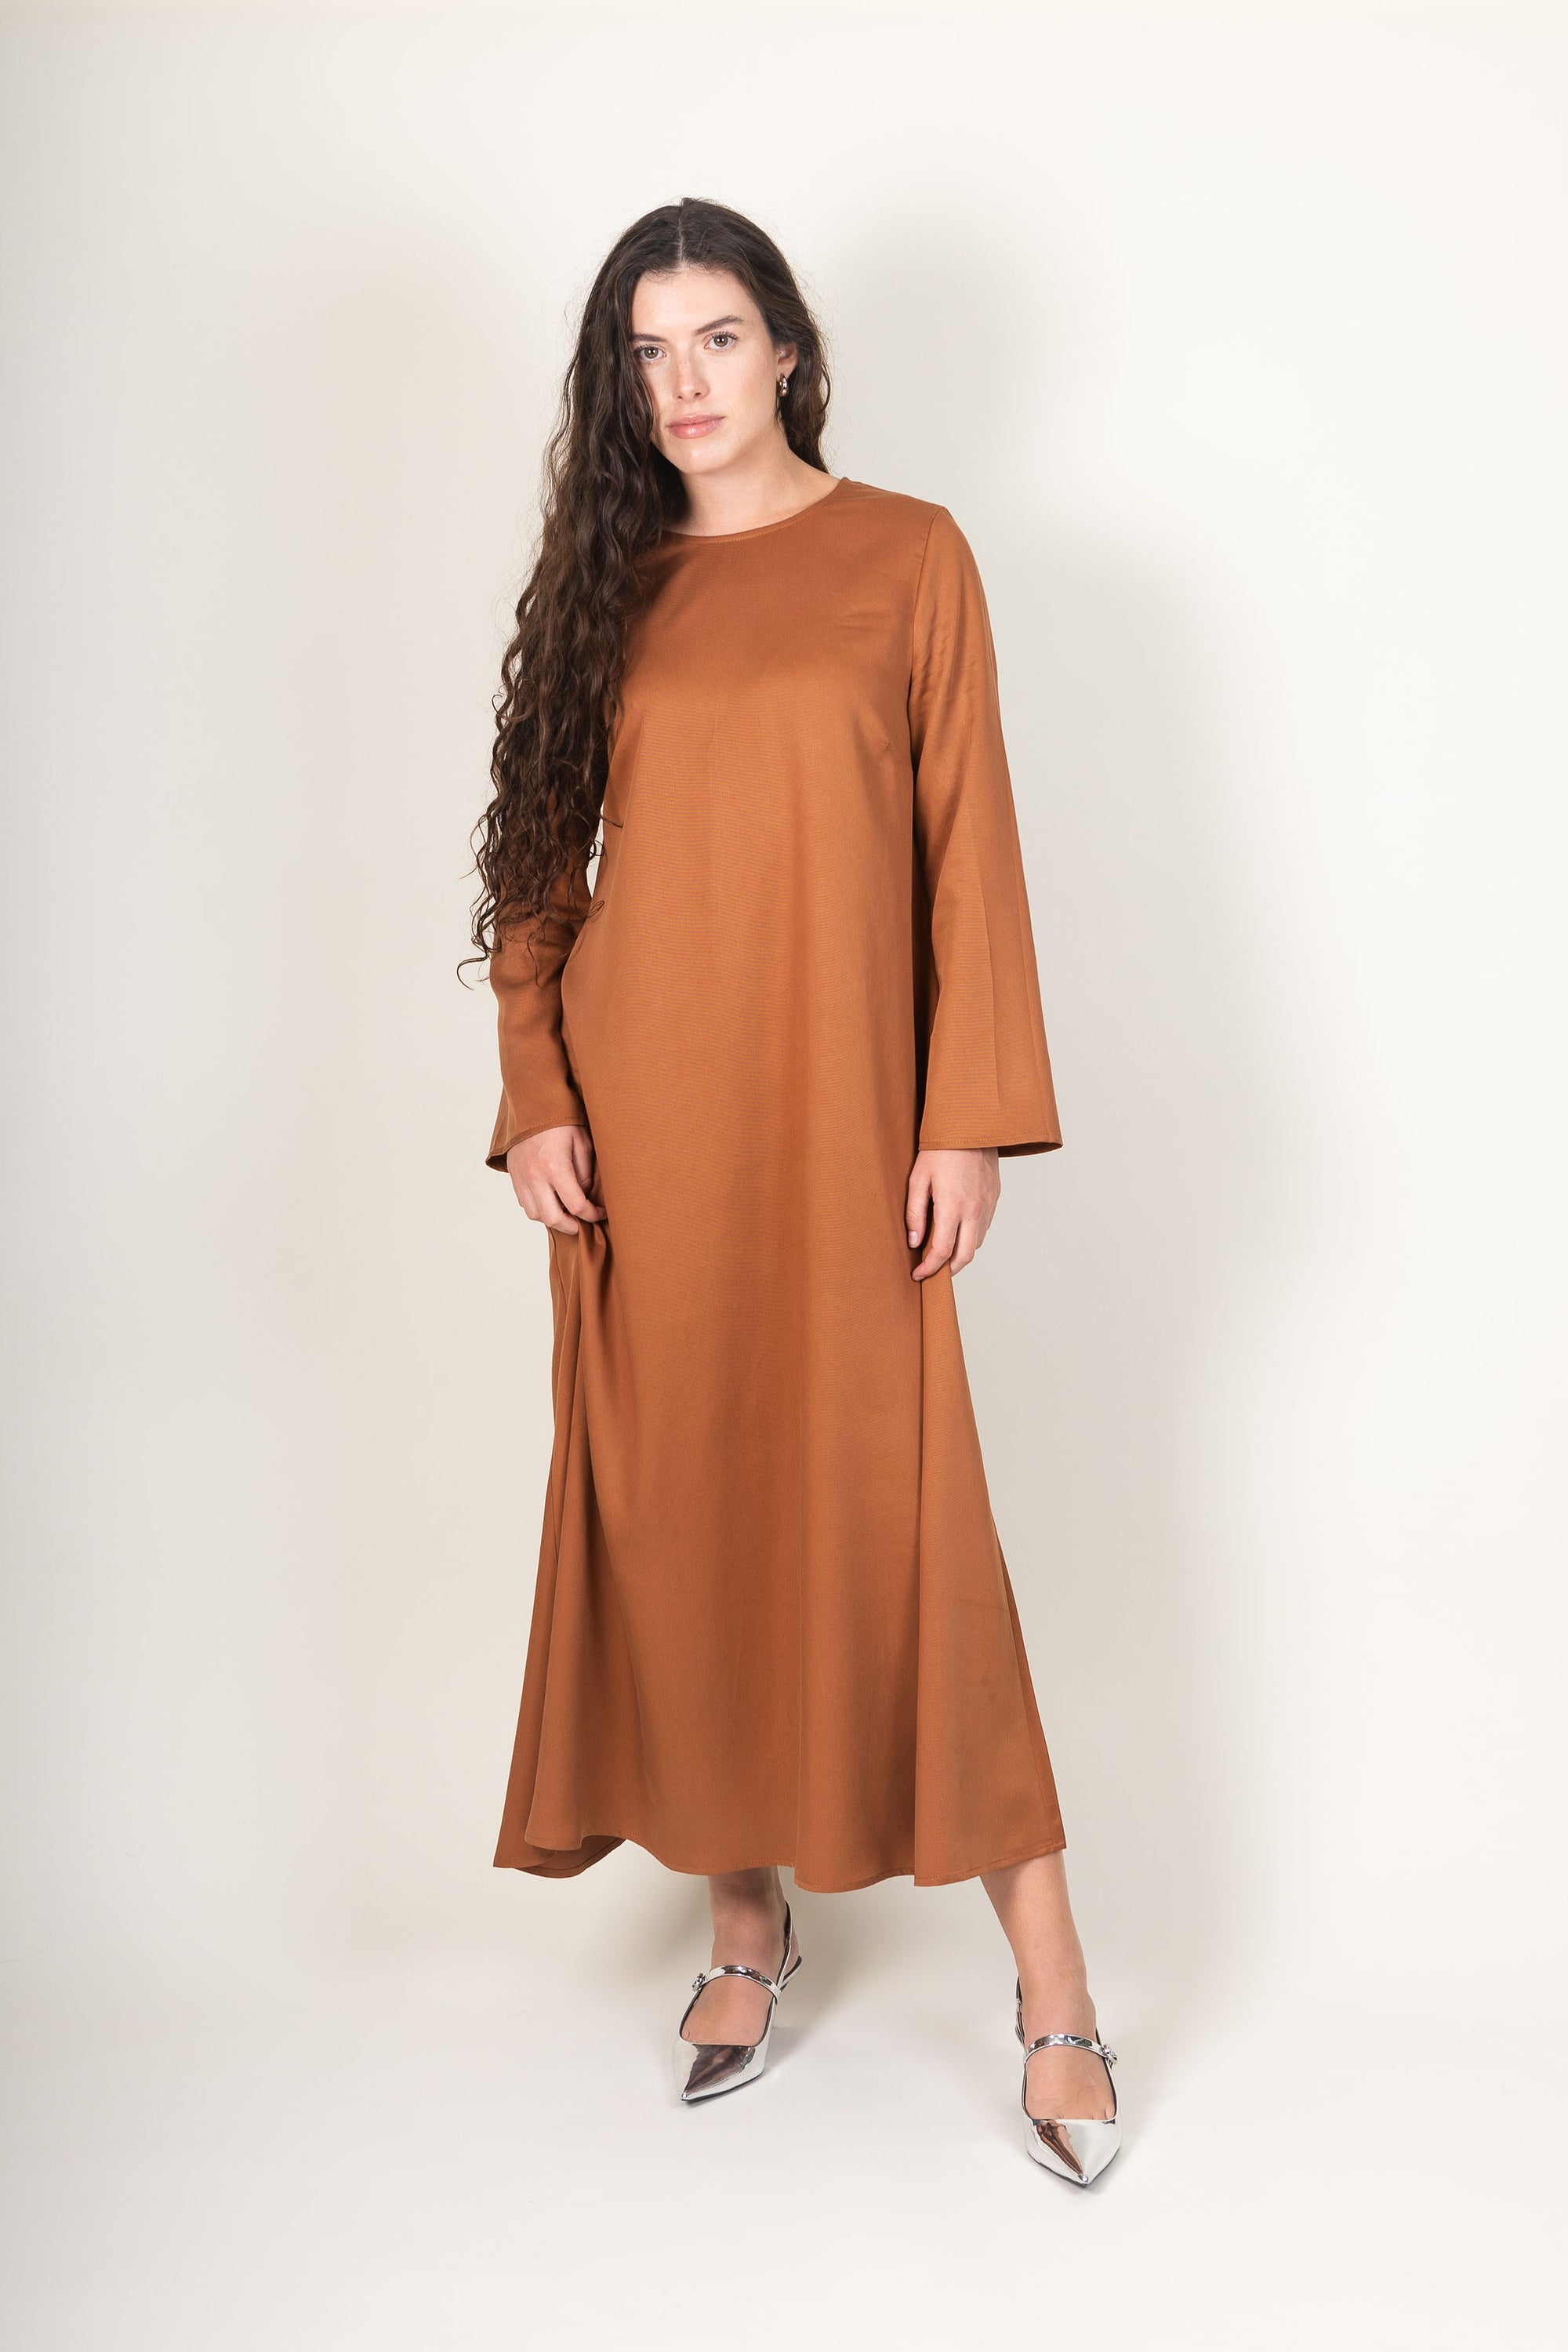 Ames Store Staple Dress in Bronze Winter dress front with silver heels